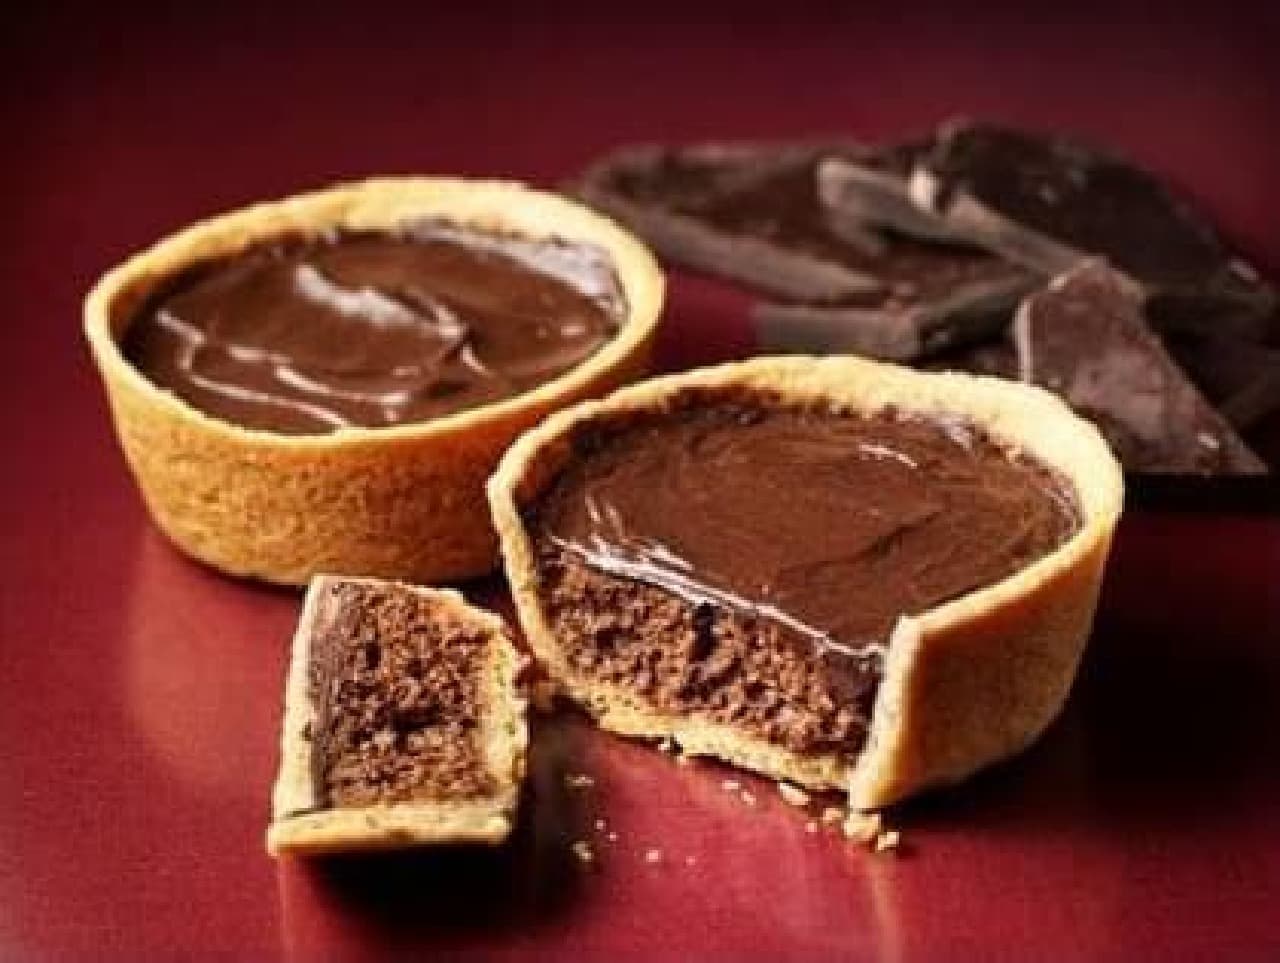 Soft and fluffy "chocolate cheese tart"